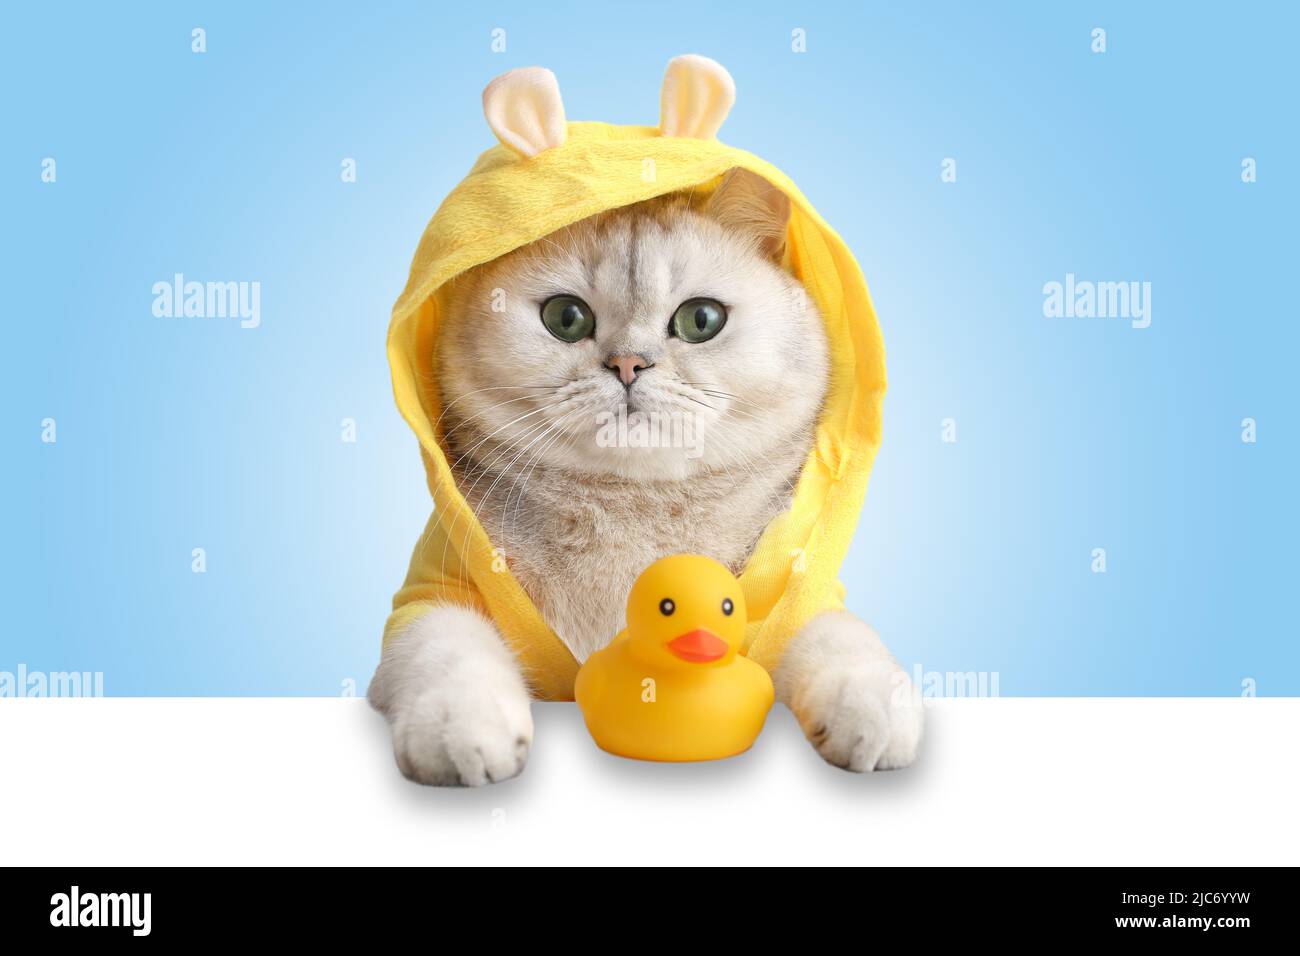 A cute white cat in a yellow coat looks out of a white shell, a yellow rubber duck stands nearby, on a light blue background. Stock Photo